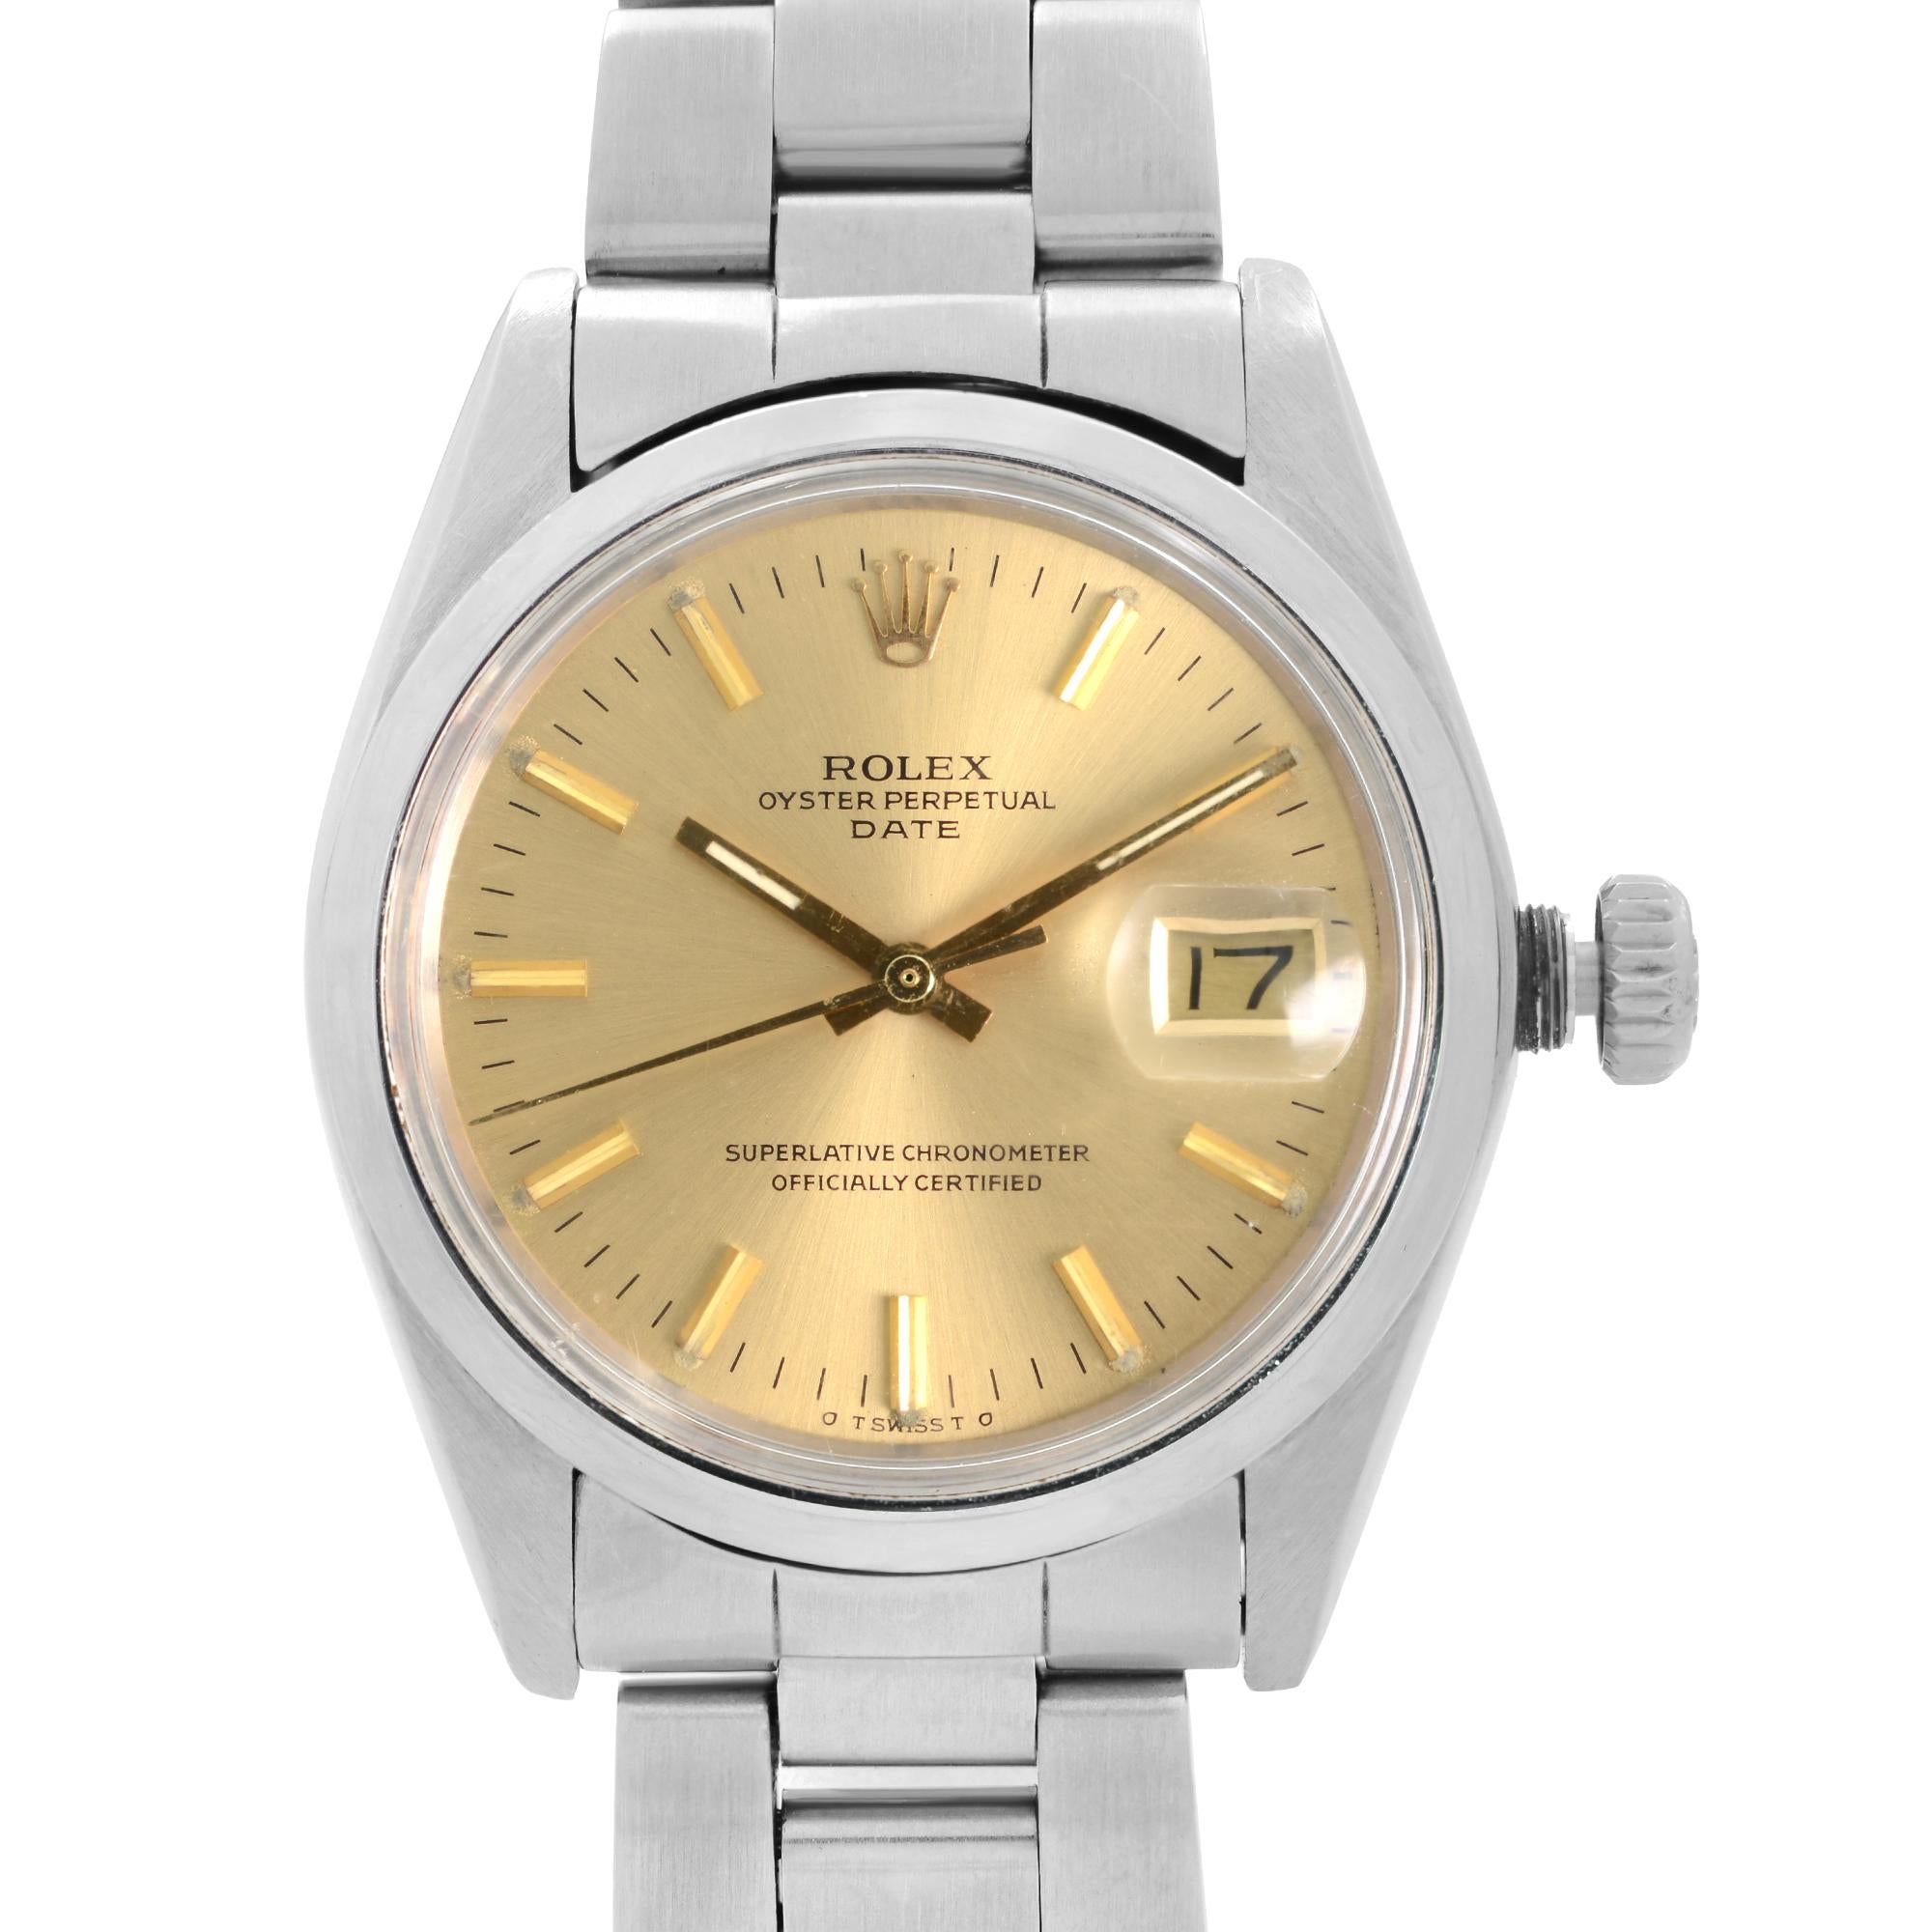 Pre Owned Vintage Rolex Date 34mm Stainless Steel Champagne Dial Automatic Men Watch 1500. This Beautiful Timepiece Was Produced in 1974 & is Powered by Mechanical (Automatic) Movement And Features: Round Stainless Steel Case & Bracelet, Fixed